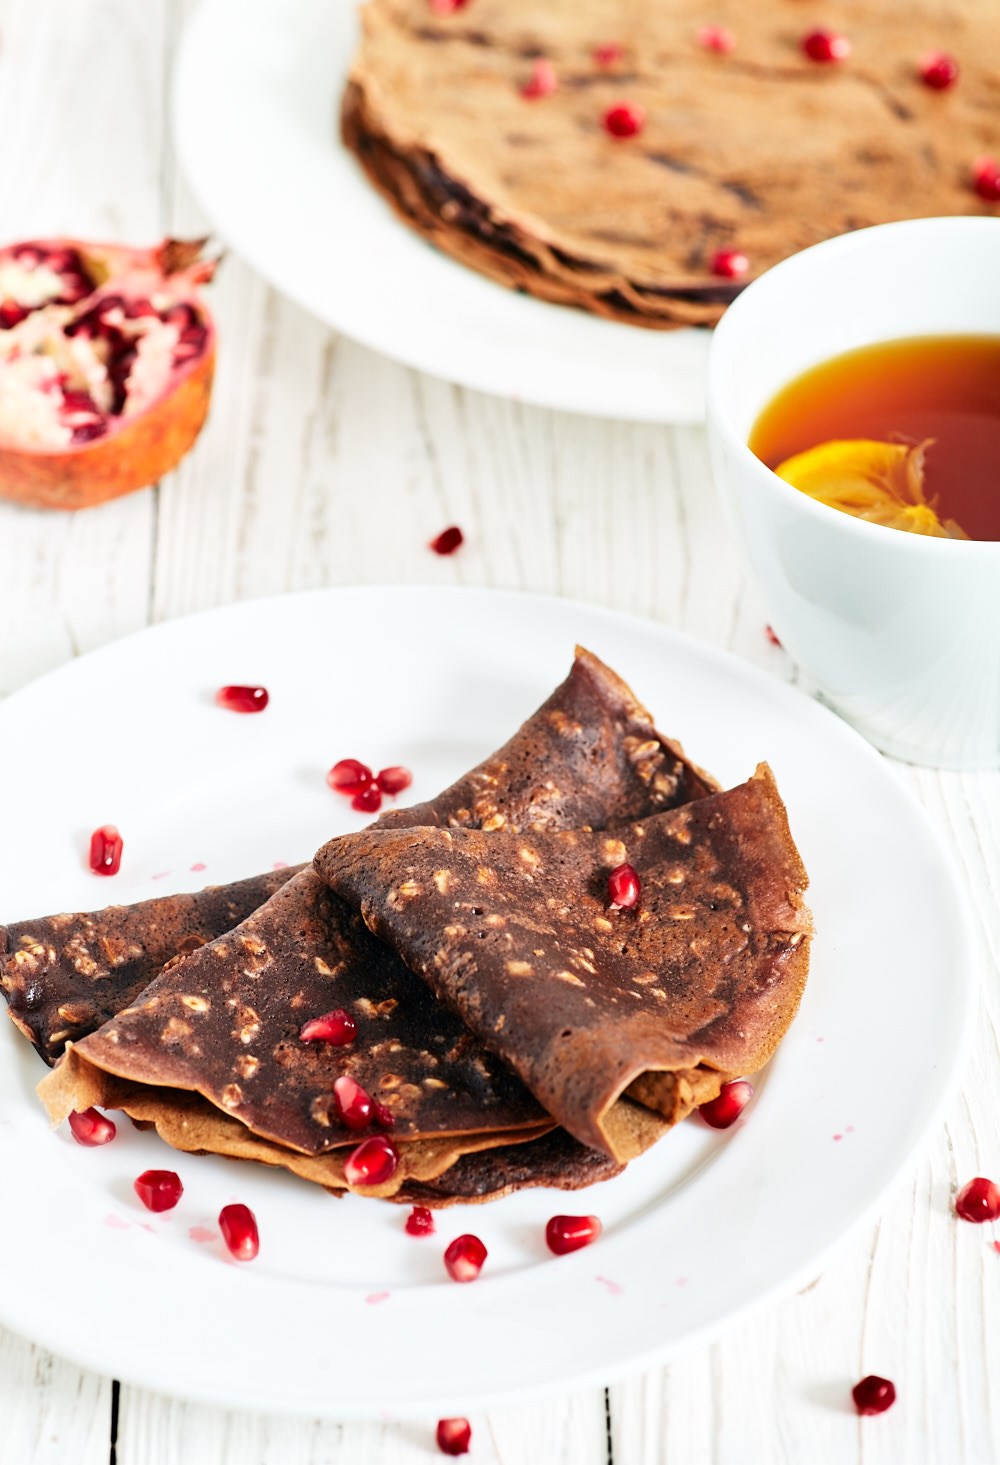 Chocolate Crepes with Oat Flakes Recipe | BayevsKitchen.com